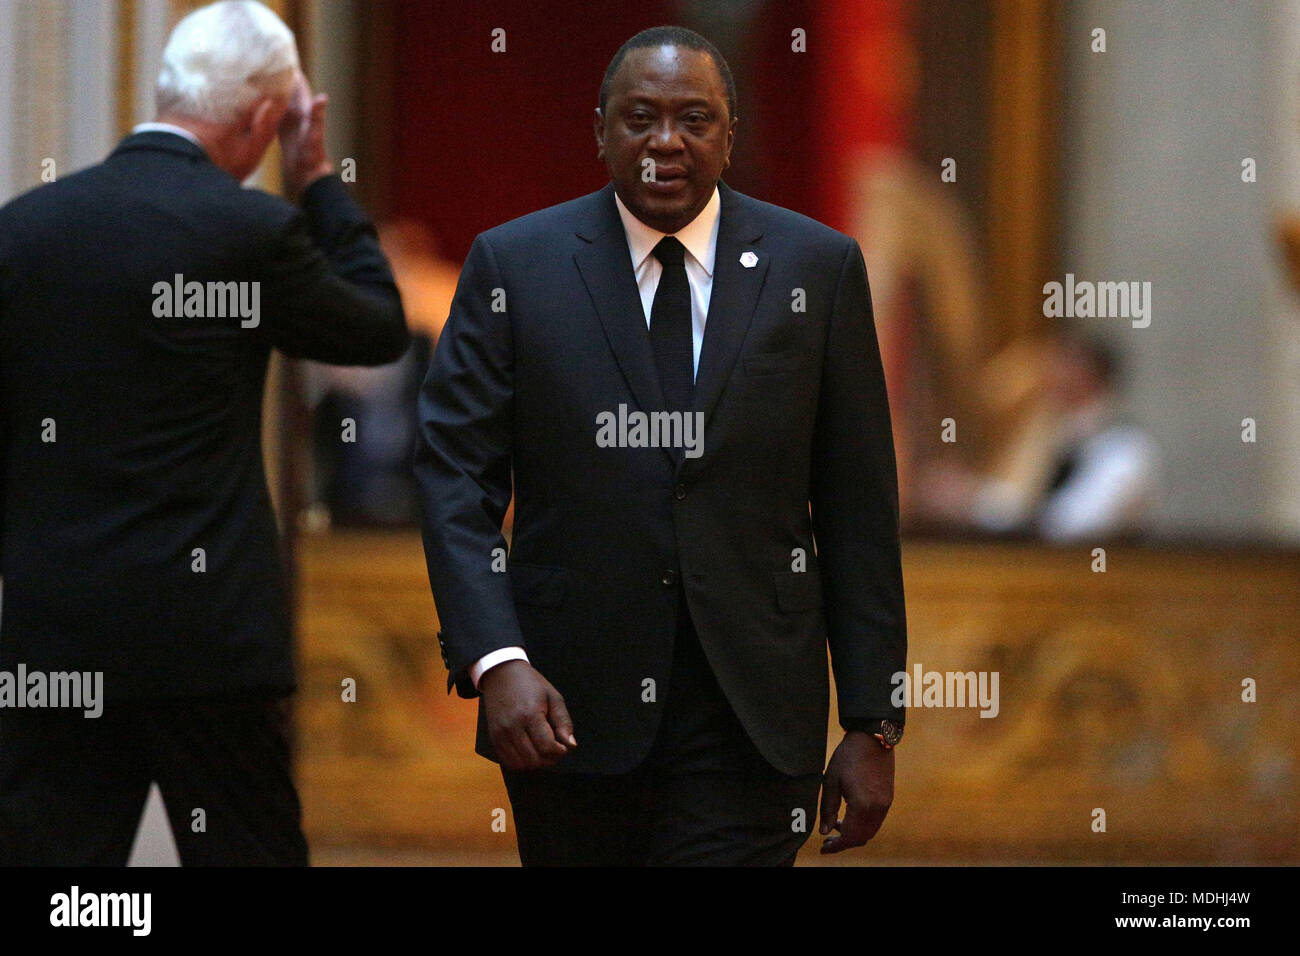 Kenya's President Uhuru Kenyatta arrives in the East Gallery at Buckingham Palace in London as Queen Elizabeth II hosts a dinner during the Commonwealth Heads of Government Meeting. Stock Photo